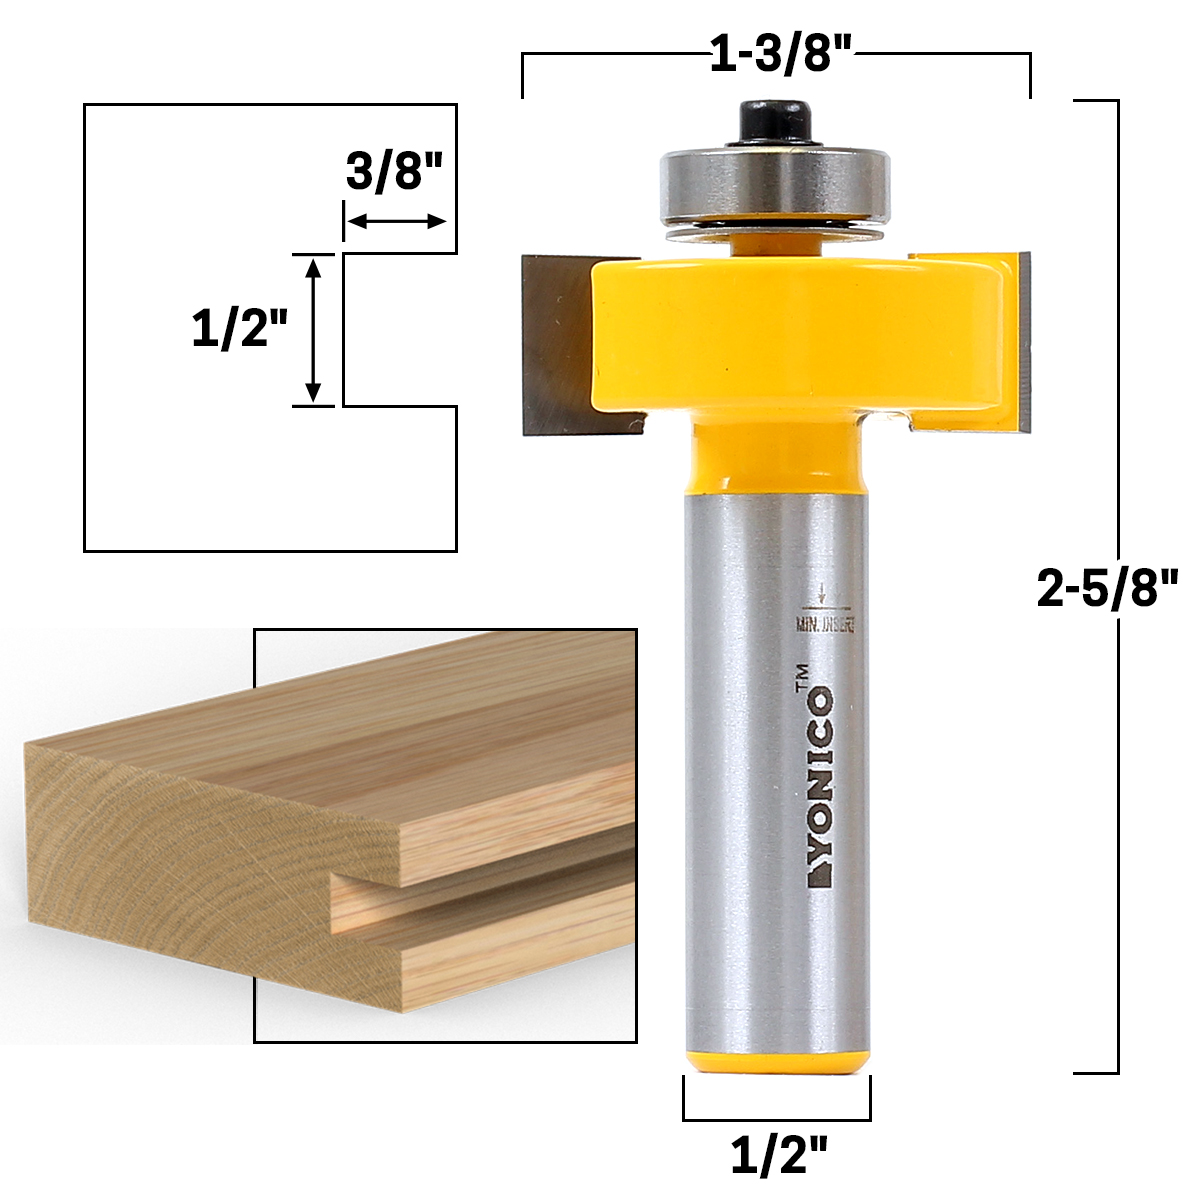 Slot Cutter Router Bits - Wood Biscuits Set